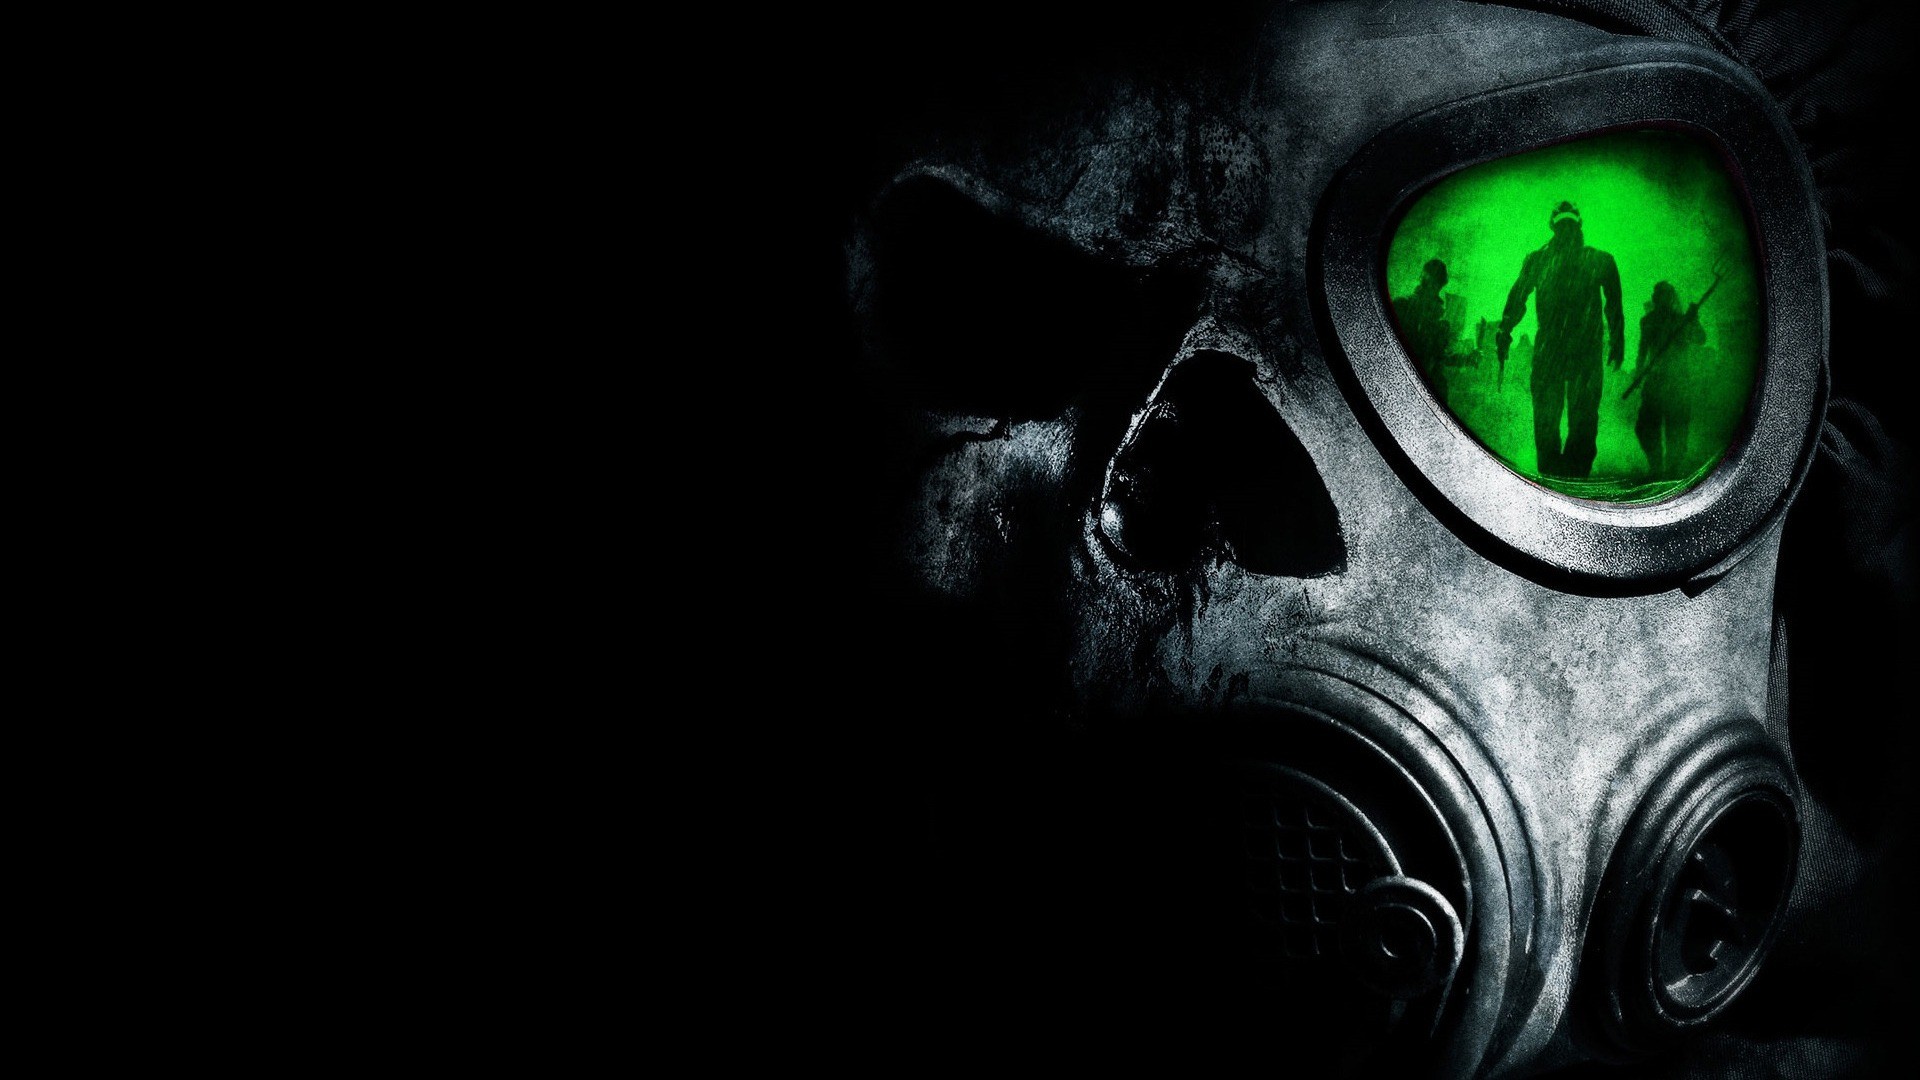 1920x1080 31 of the Scariest Halloween Desktop Wallpapers for 2014 - Brand ... scary  ...